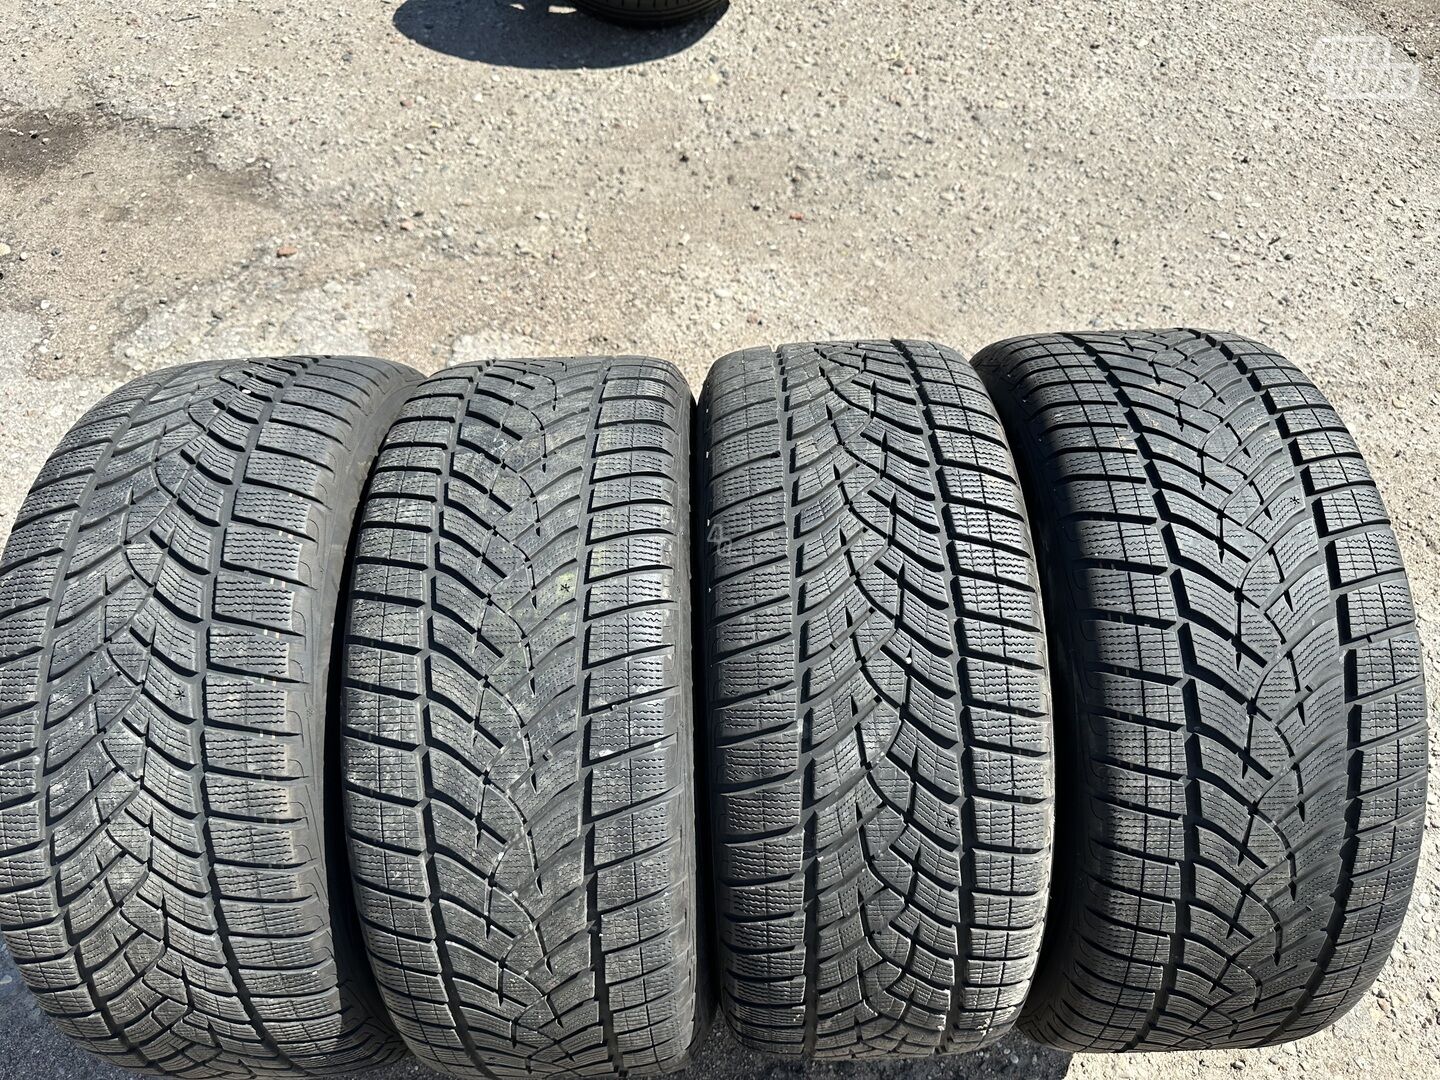 Goodyear Siunciam, 6-7mm 2020 R19 universal tyres passanger car